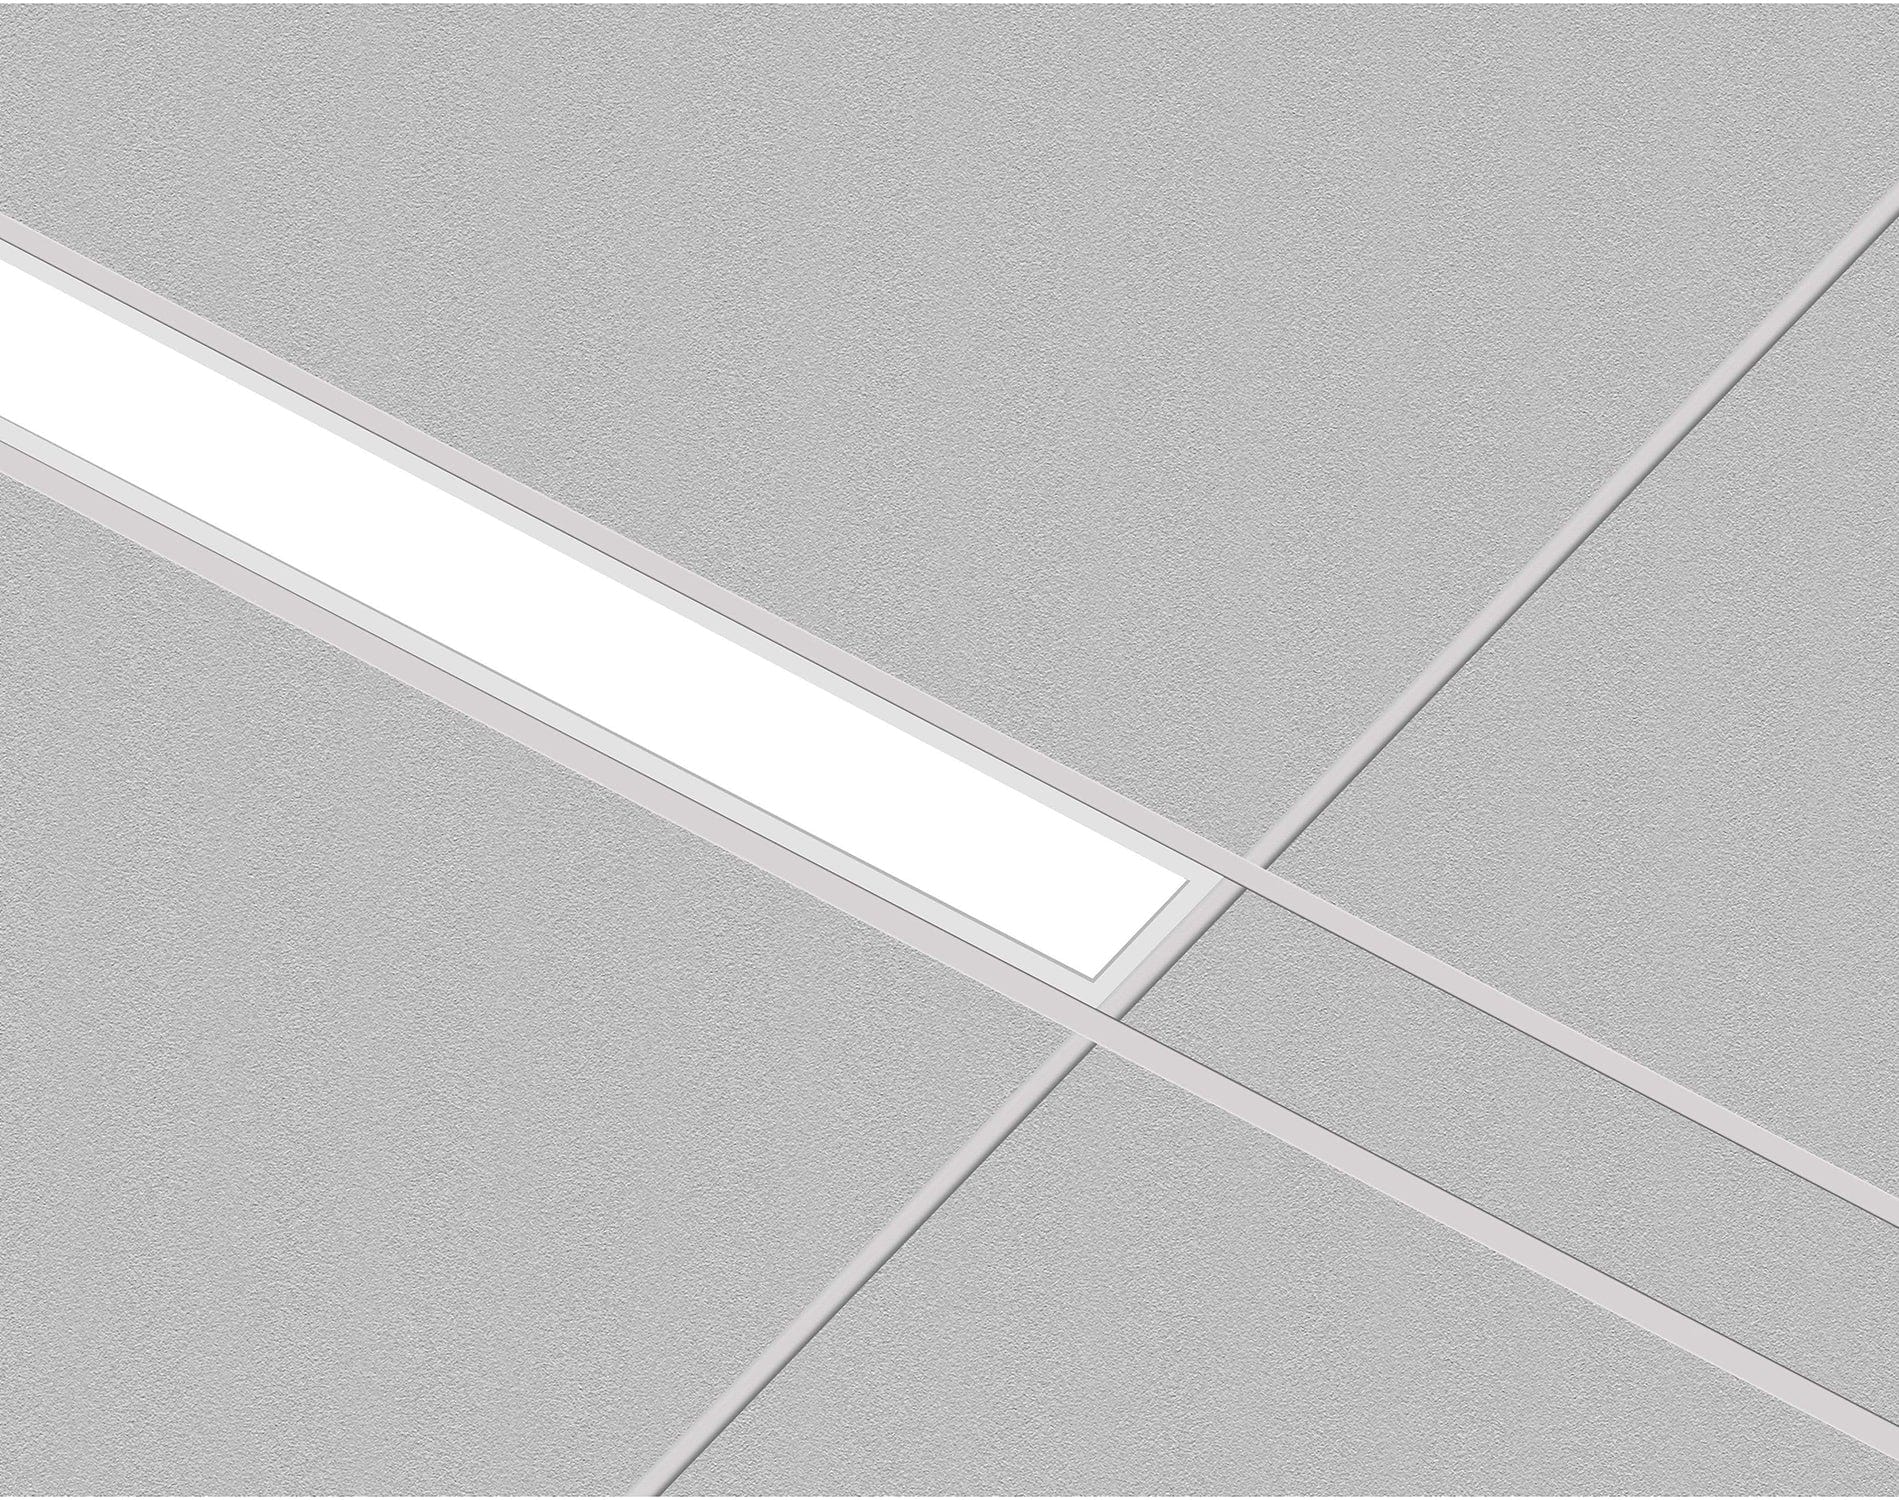 POE Texas Lighting Denton Linear Recessed PoE Lights - 6 in x 2 ft (Recessed)